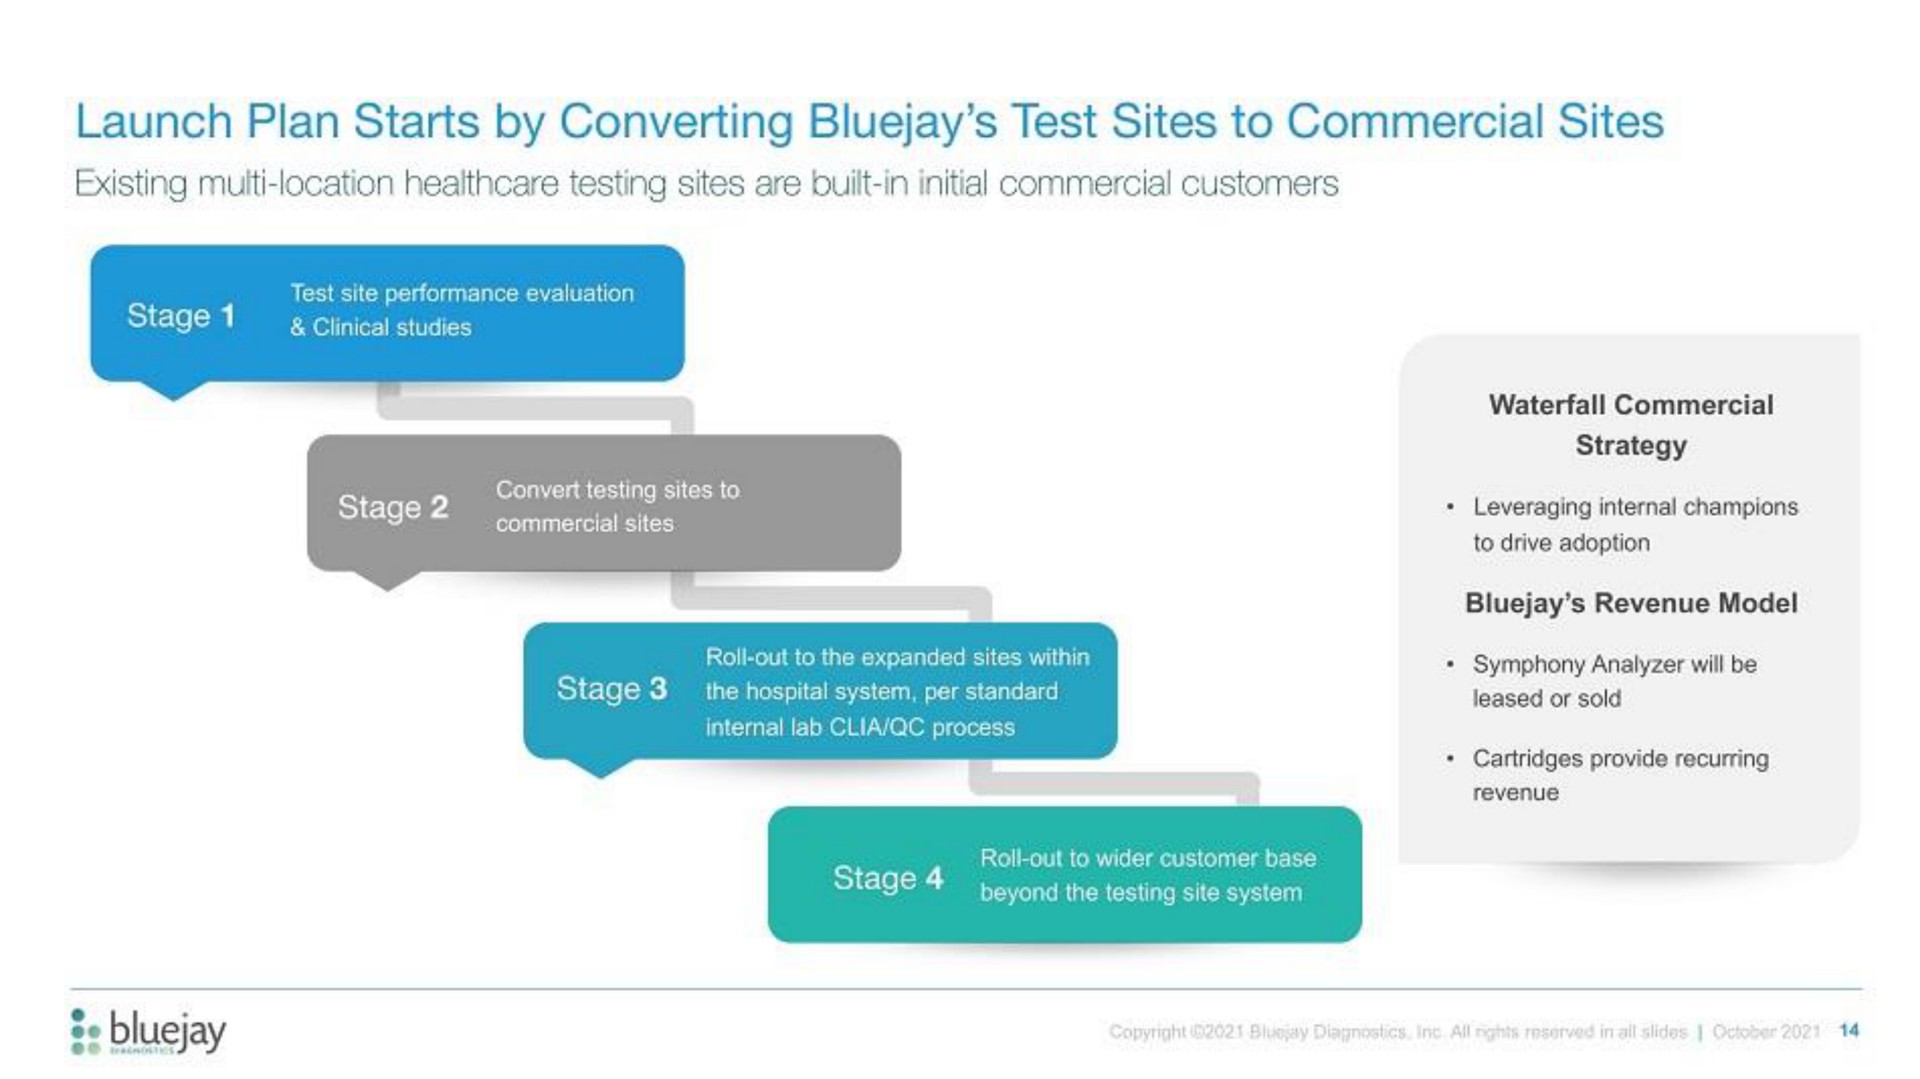 launch plan starts by converting test sites to commercial sites | Bluejay